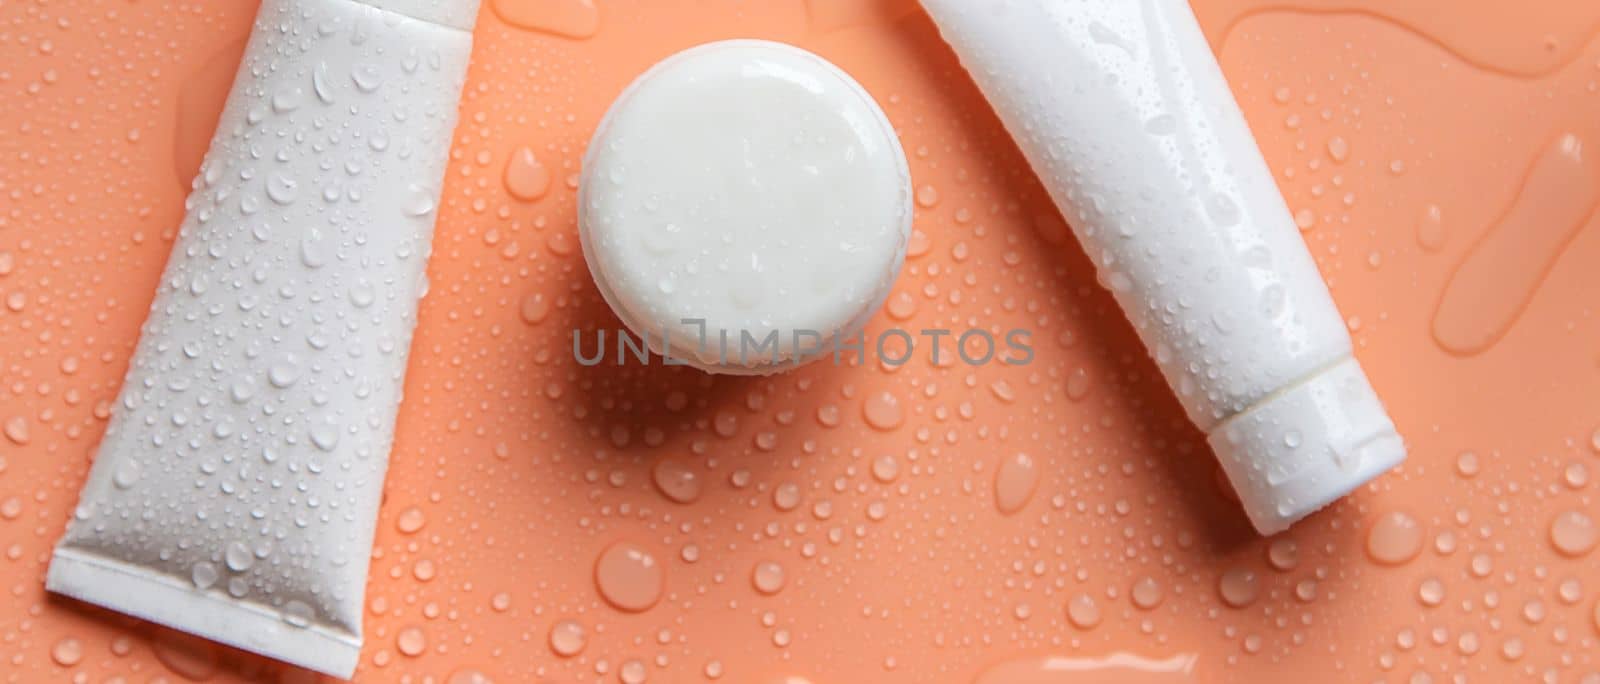 Moisturizing cosmetics on a wet background. Selective focus. by mila1784